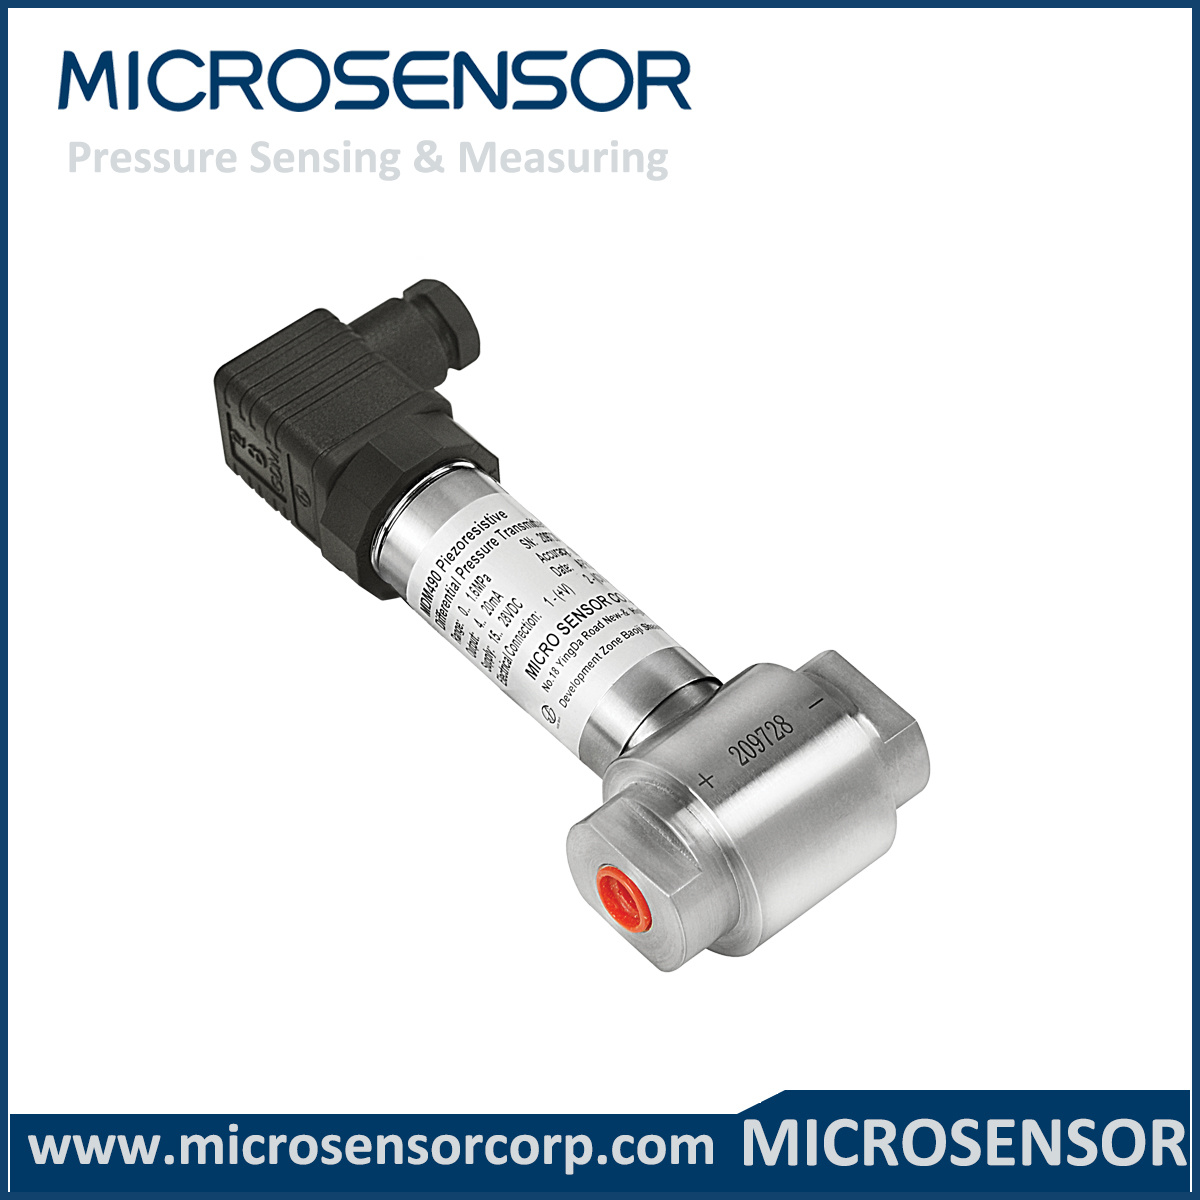 2-Wire High Accuracy Differential Pressure Sensor MDM490